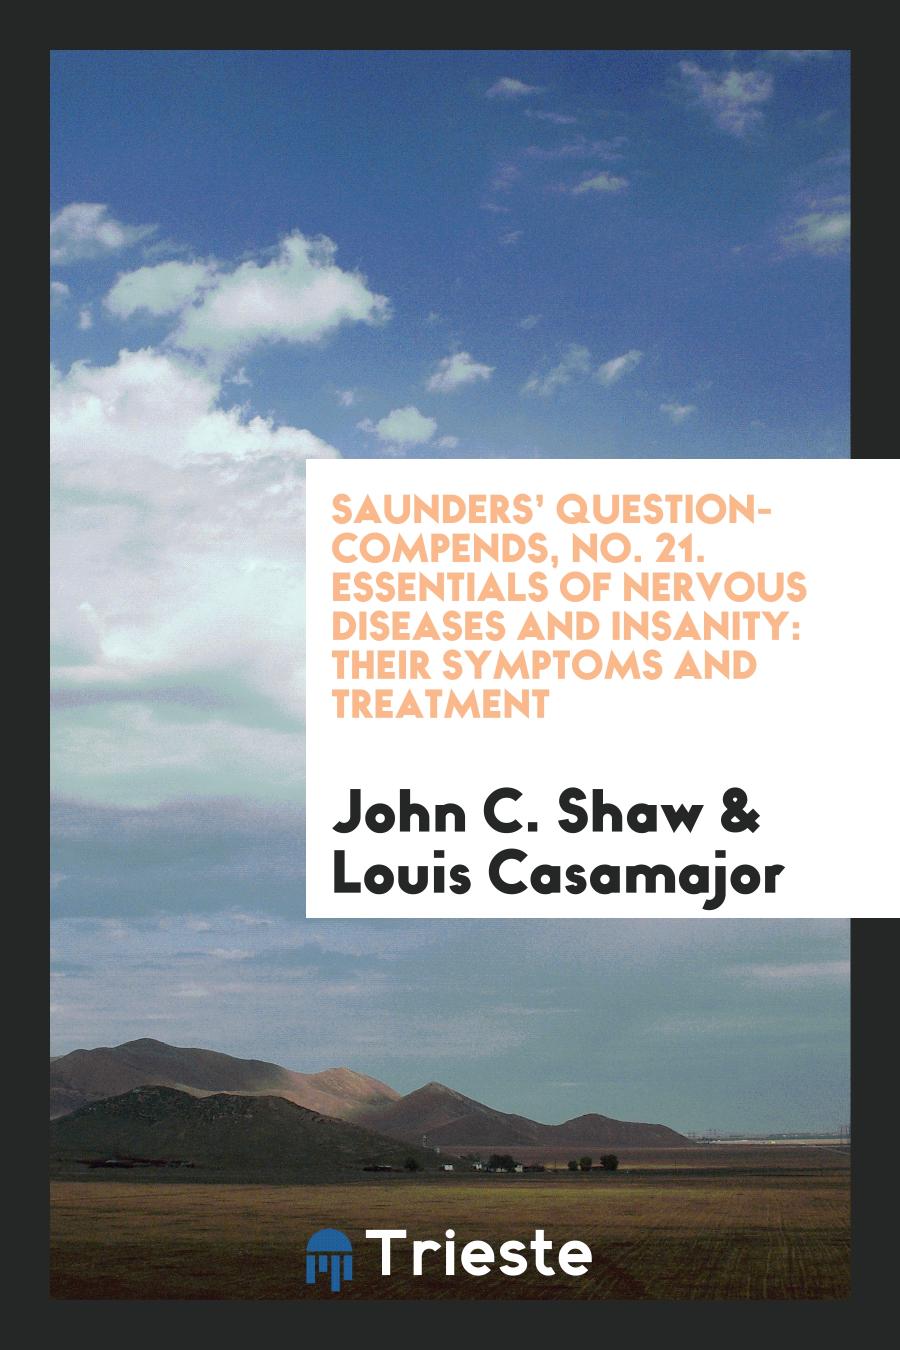 Saunders’ Question-Compends, No. 21. Essentials of Nervous Diseases and Insanity: Their Symptoms and Treatment